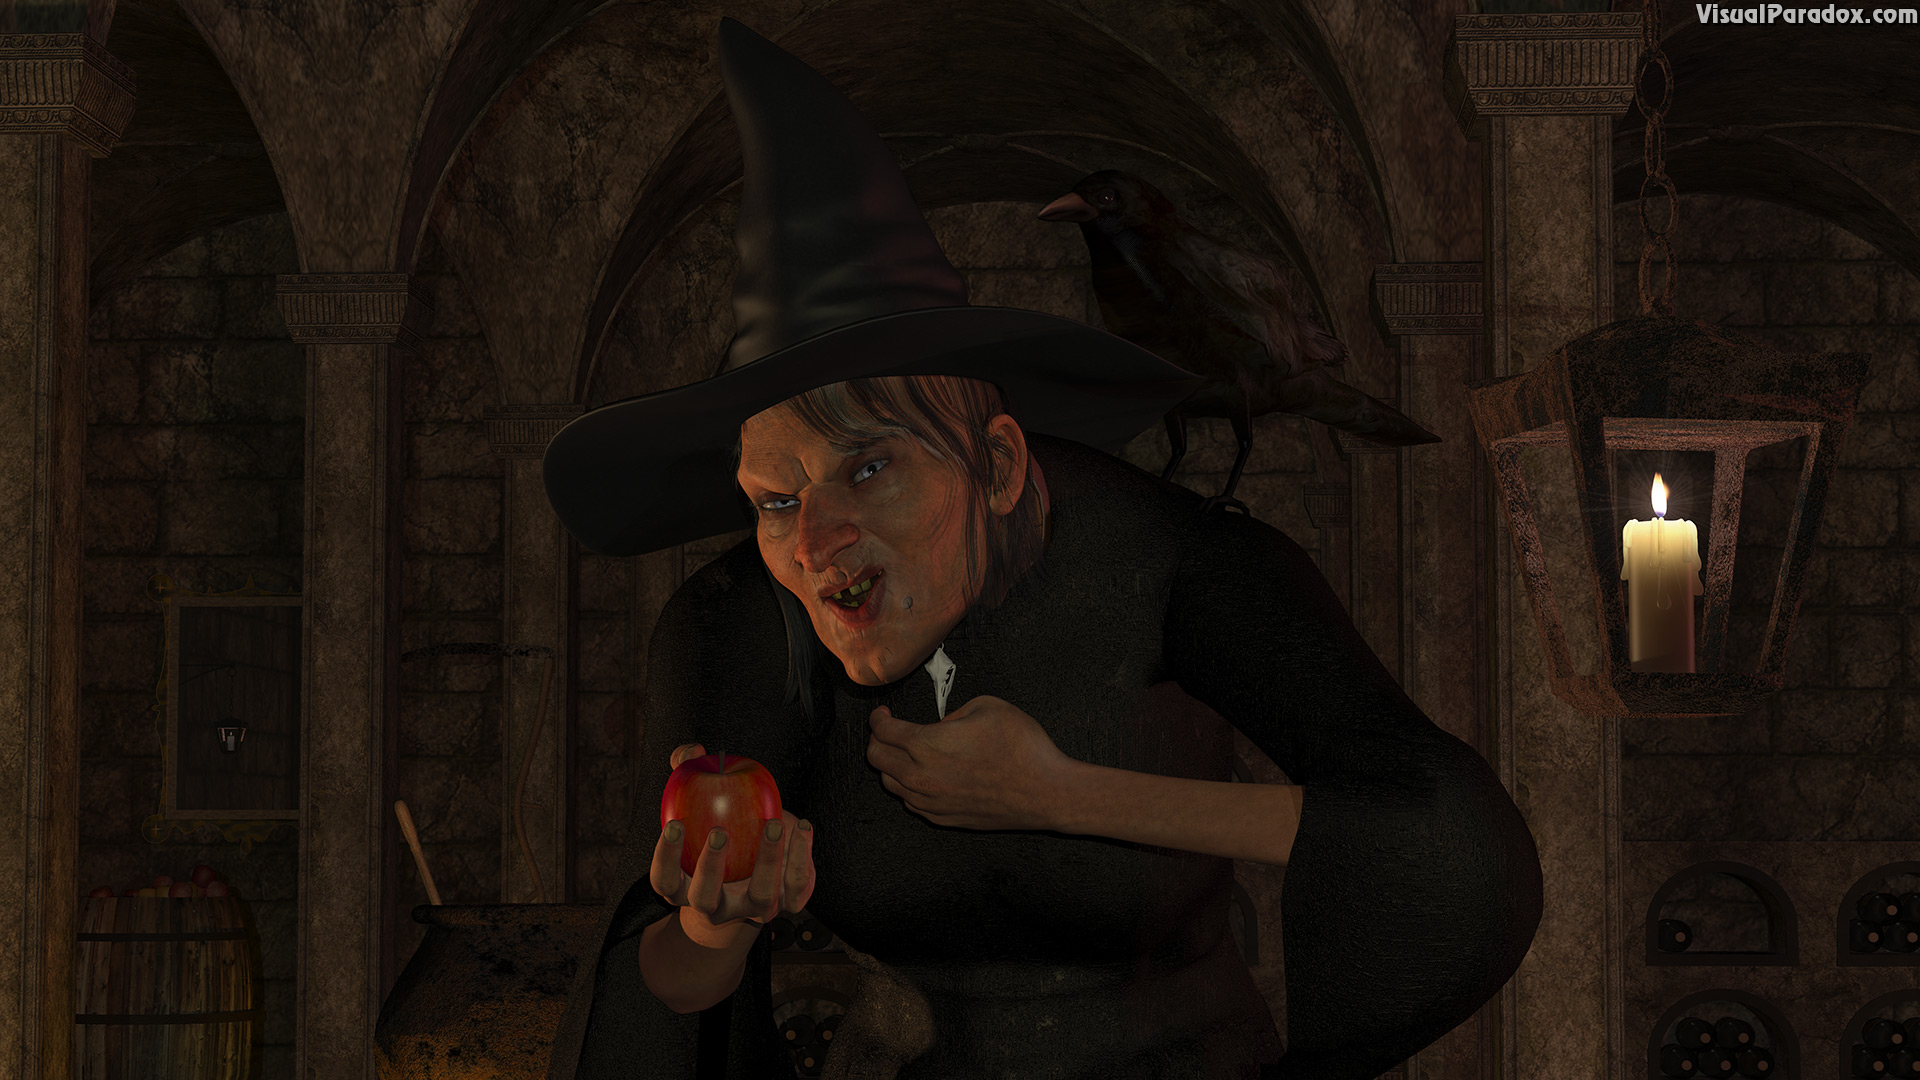 apple, black, cauldron, concept, costume, creepy, curse, day, demon, dress, eve, evil, fairytale, female, finger, food, fruit, giving, gothic, halloween, hand, holding, holiday, horrible, human, image, occasion, october, offering, old, poisonous, pot, raven, ripe, scary, sorceress, sorcery, spooky, tradition, traditional, ugly, wicked, witch, witchcraft, woman, crow, spell, cast, tainted, offer, poison, candle, pointed, hat, 3d, wallpaper